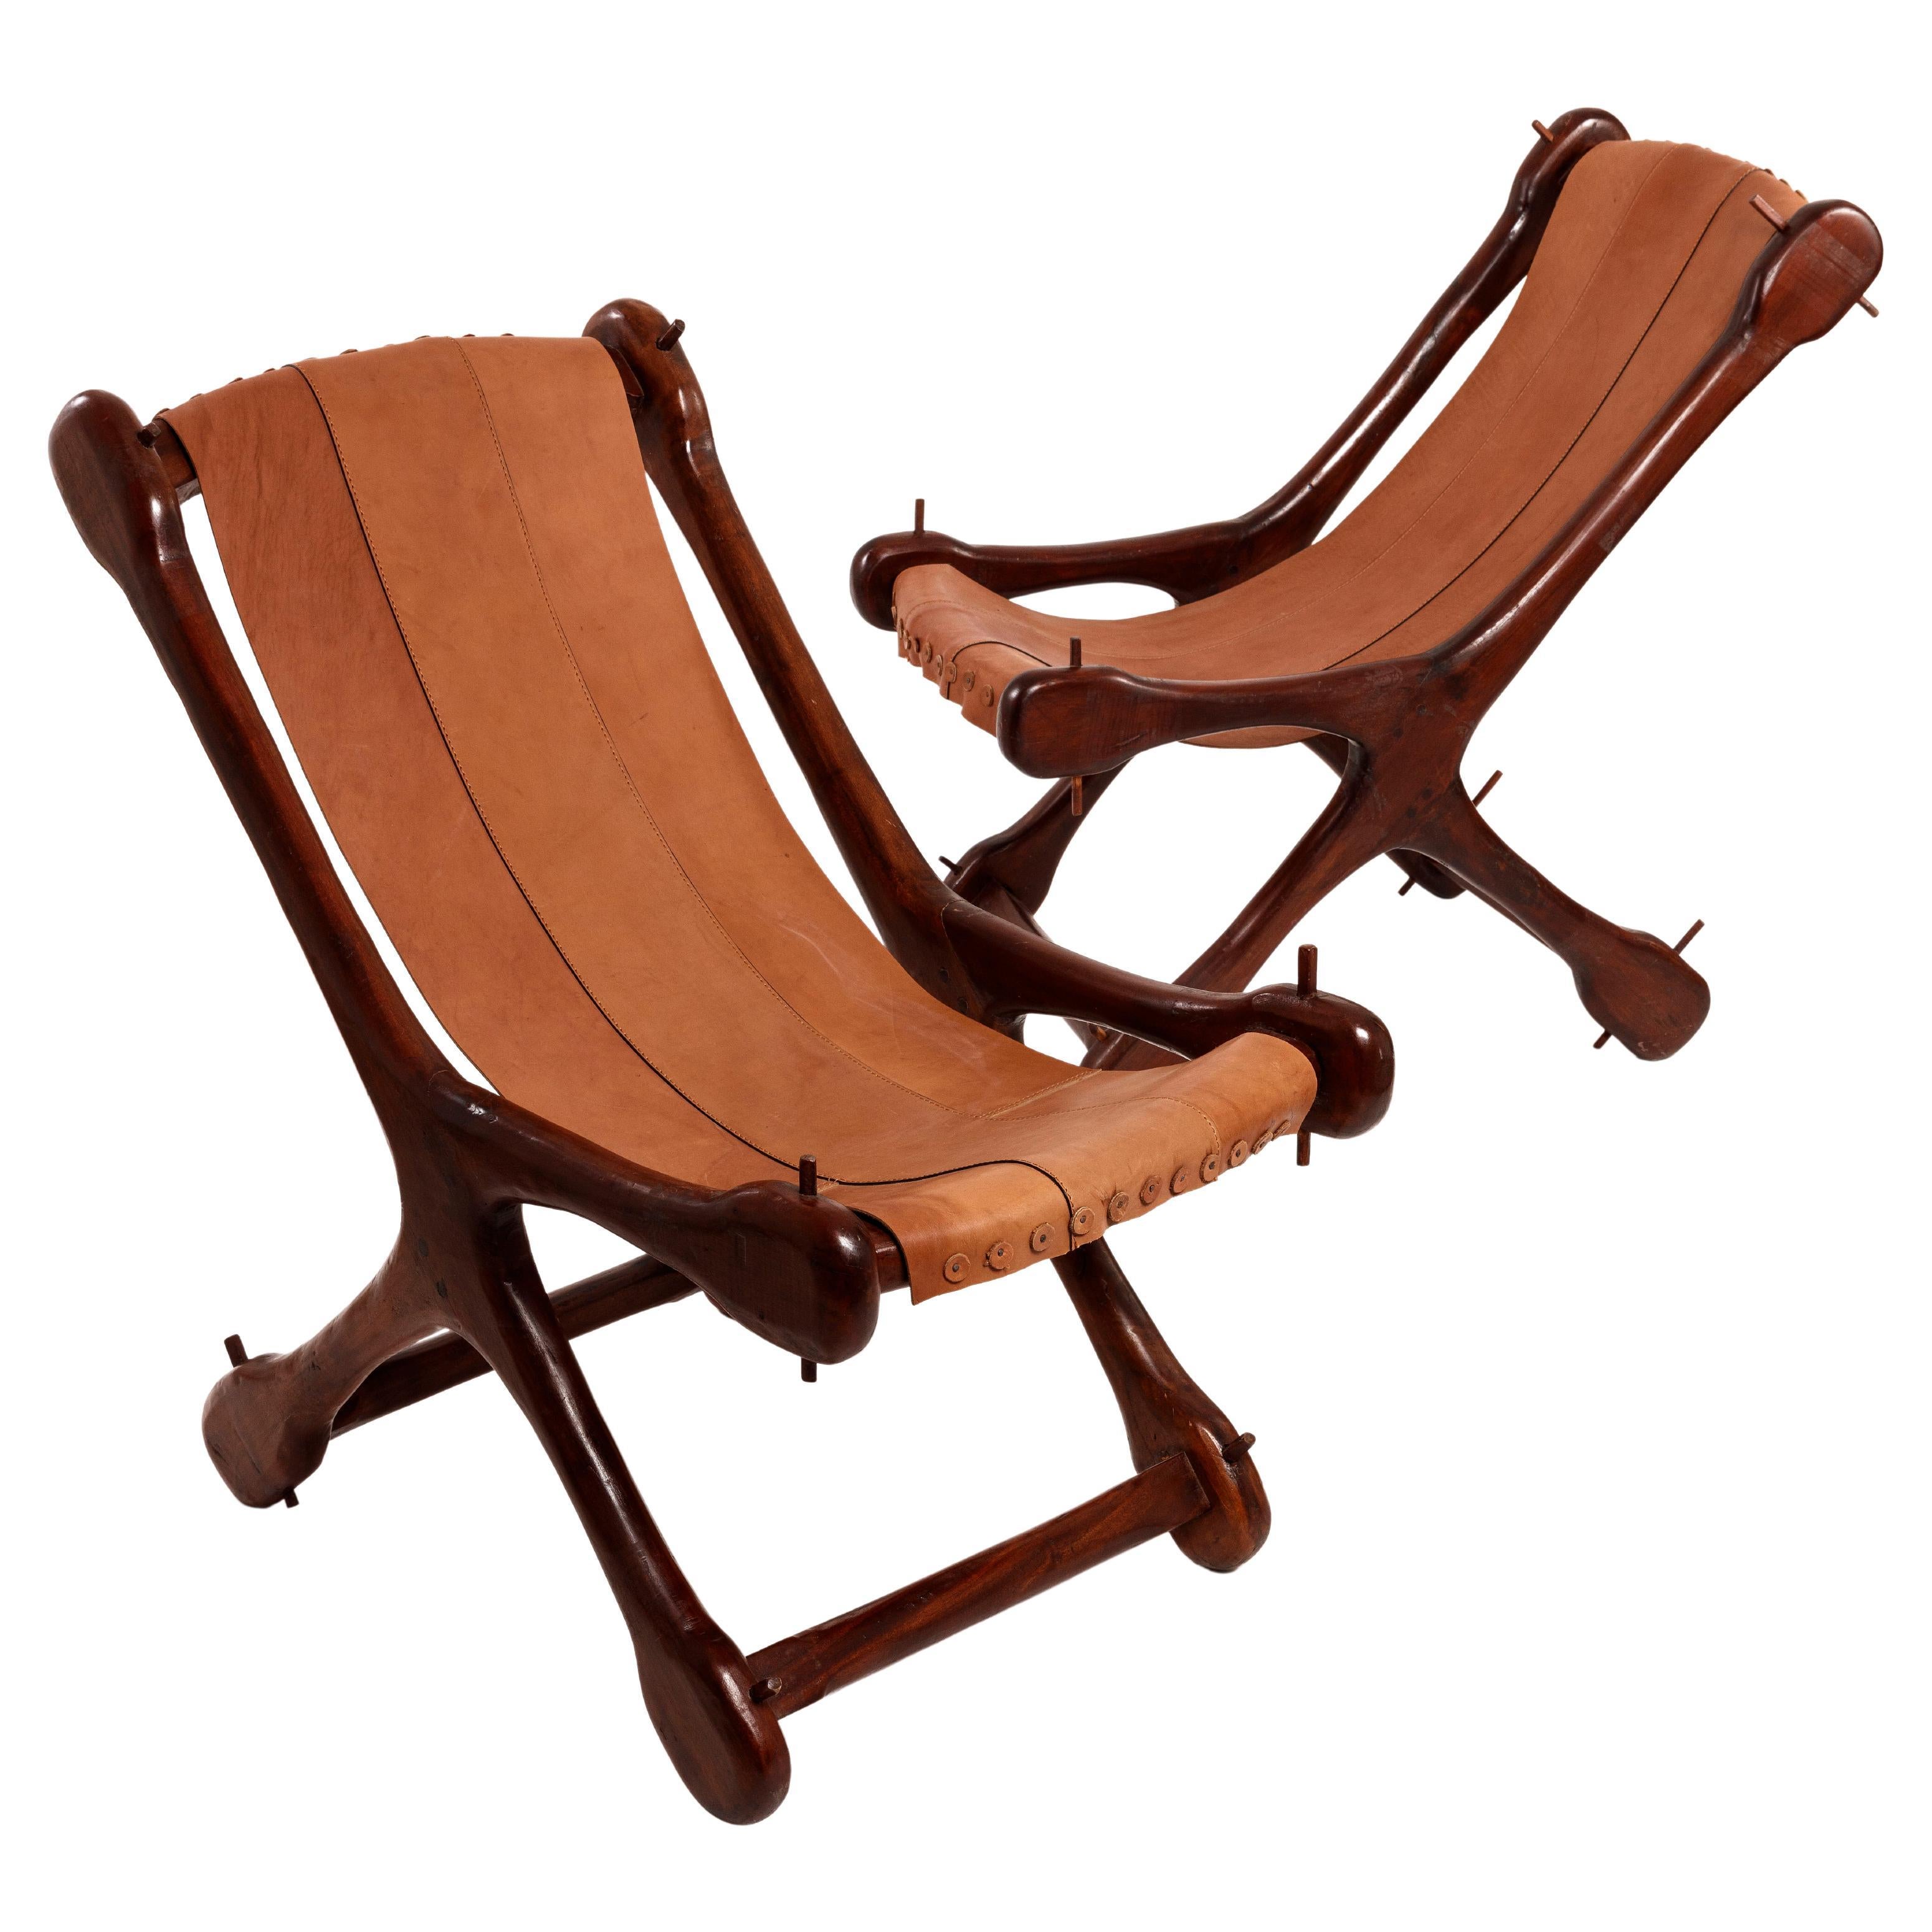 Don Shoemaker Sling Sloucher Chairs Señal, Sculptural and Organic, Mexico